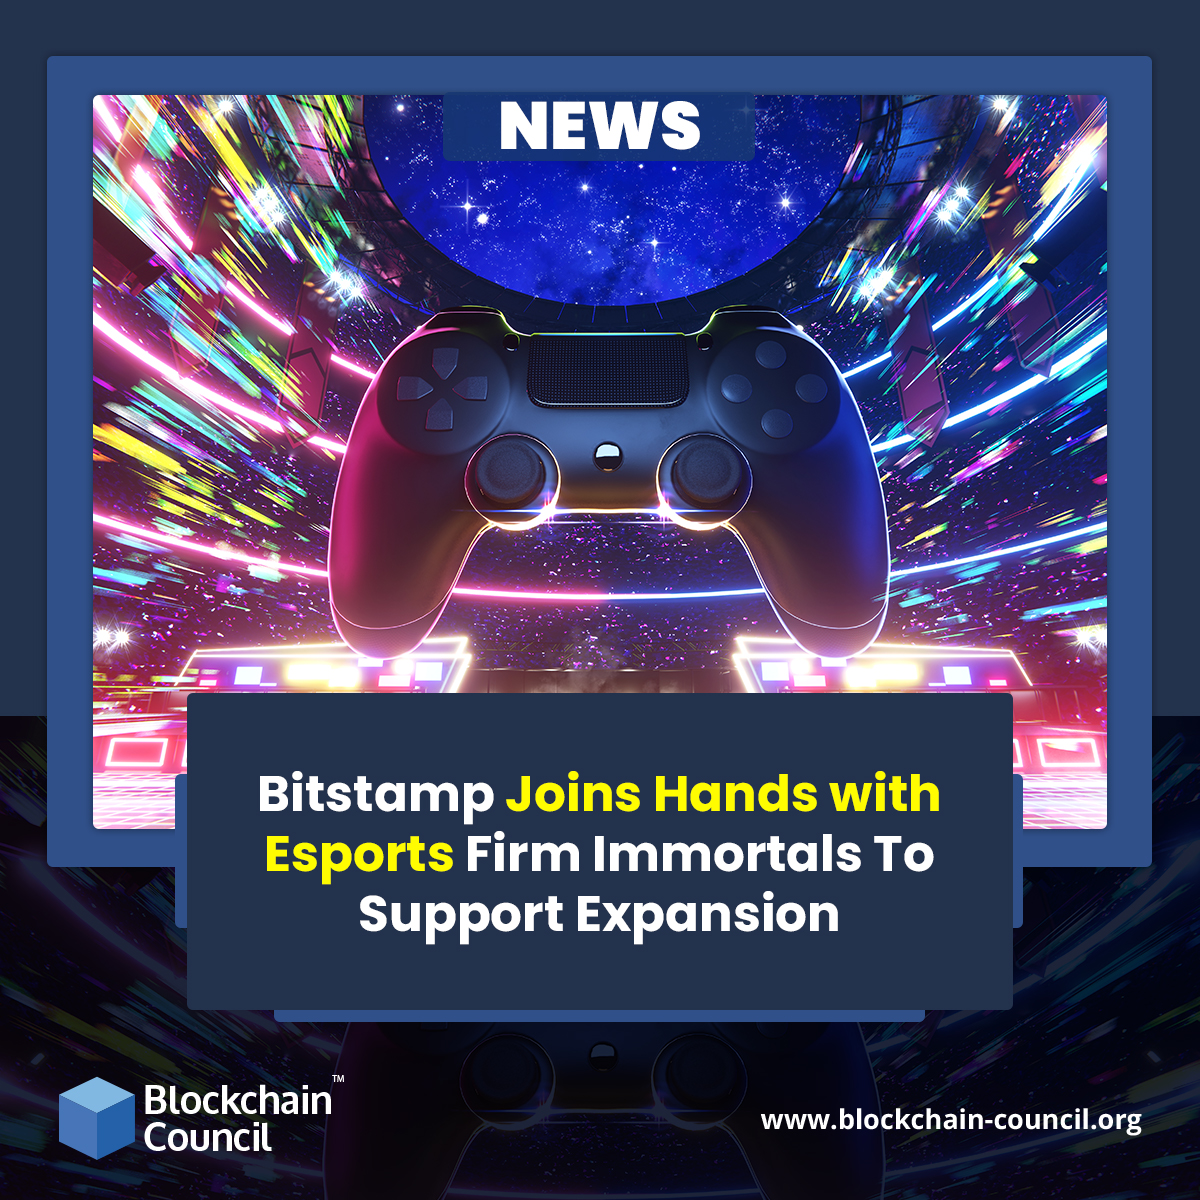 Bitstamp Joins Hands with Esports Firm Immortals To Support Expansion